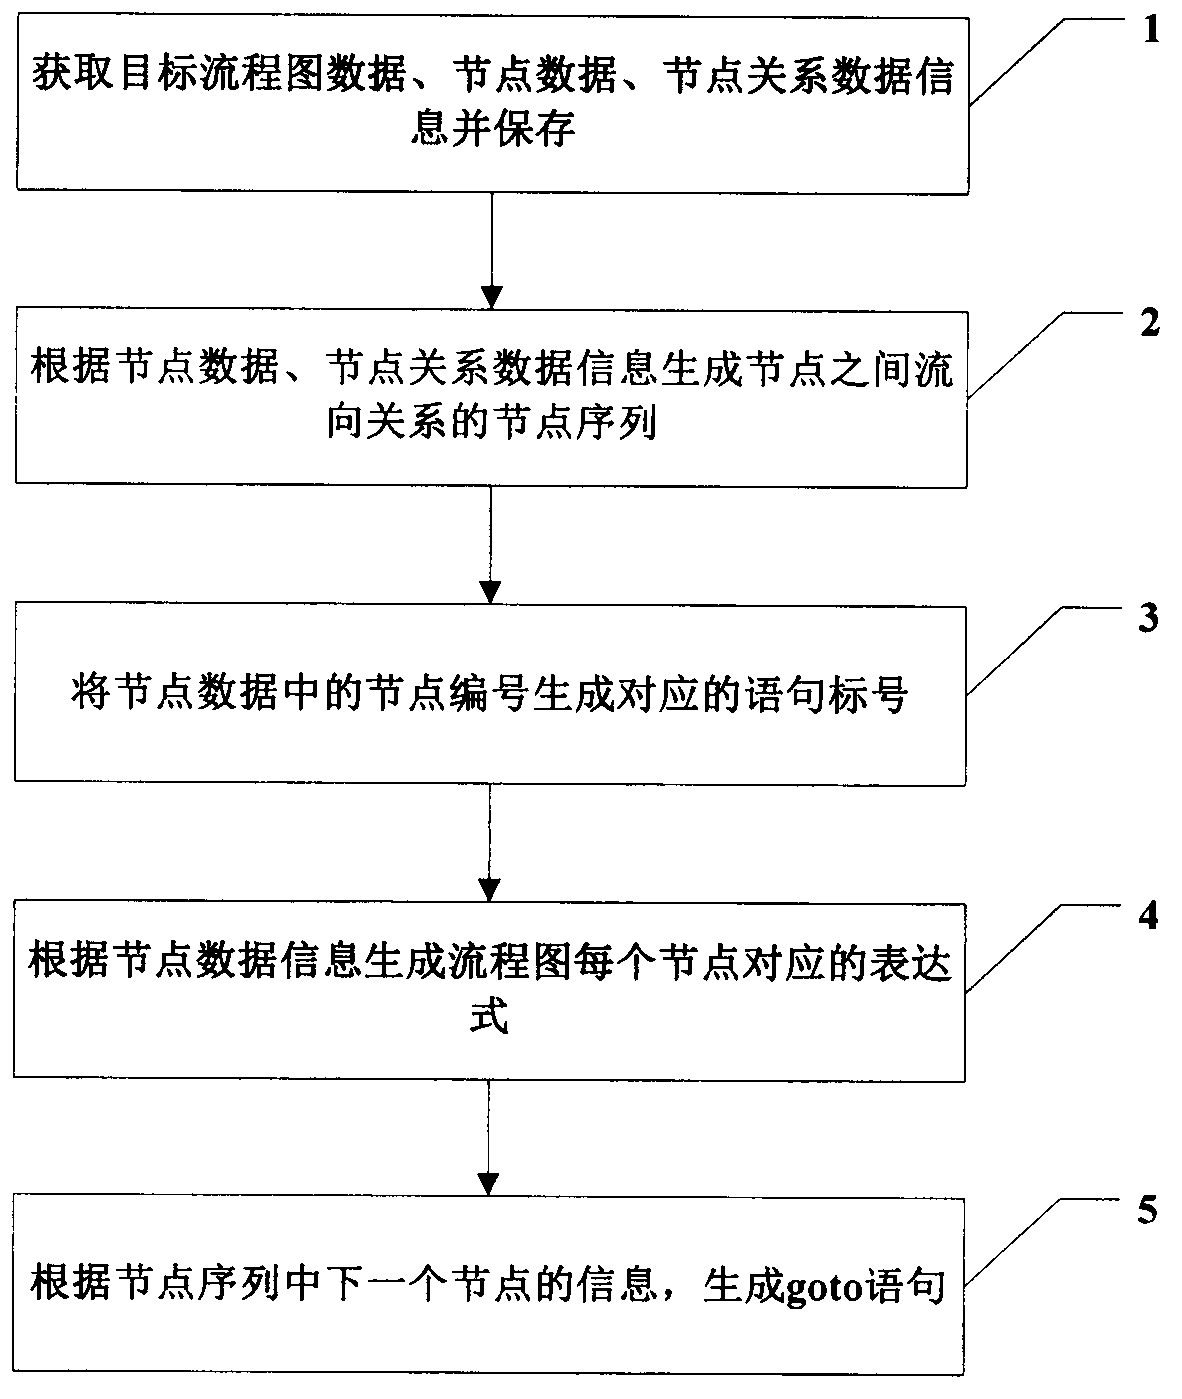 Method for converting flow chart into executable language